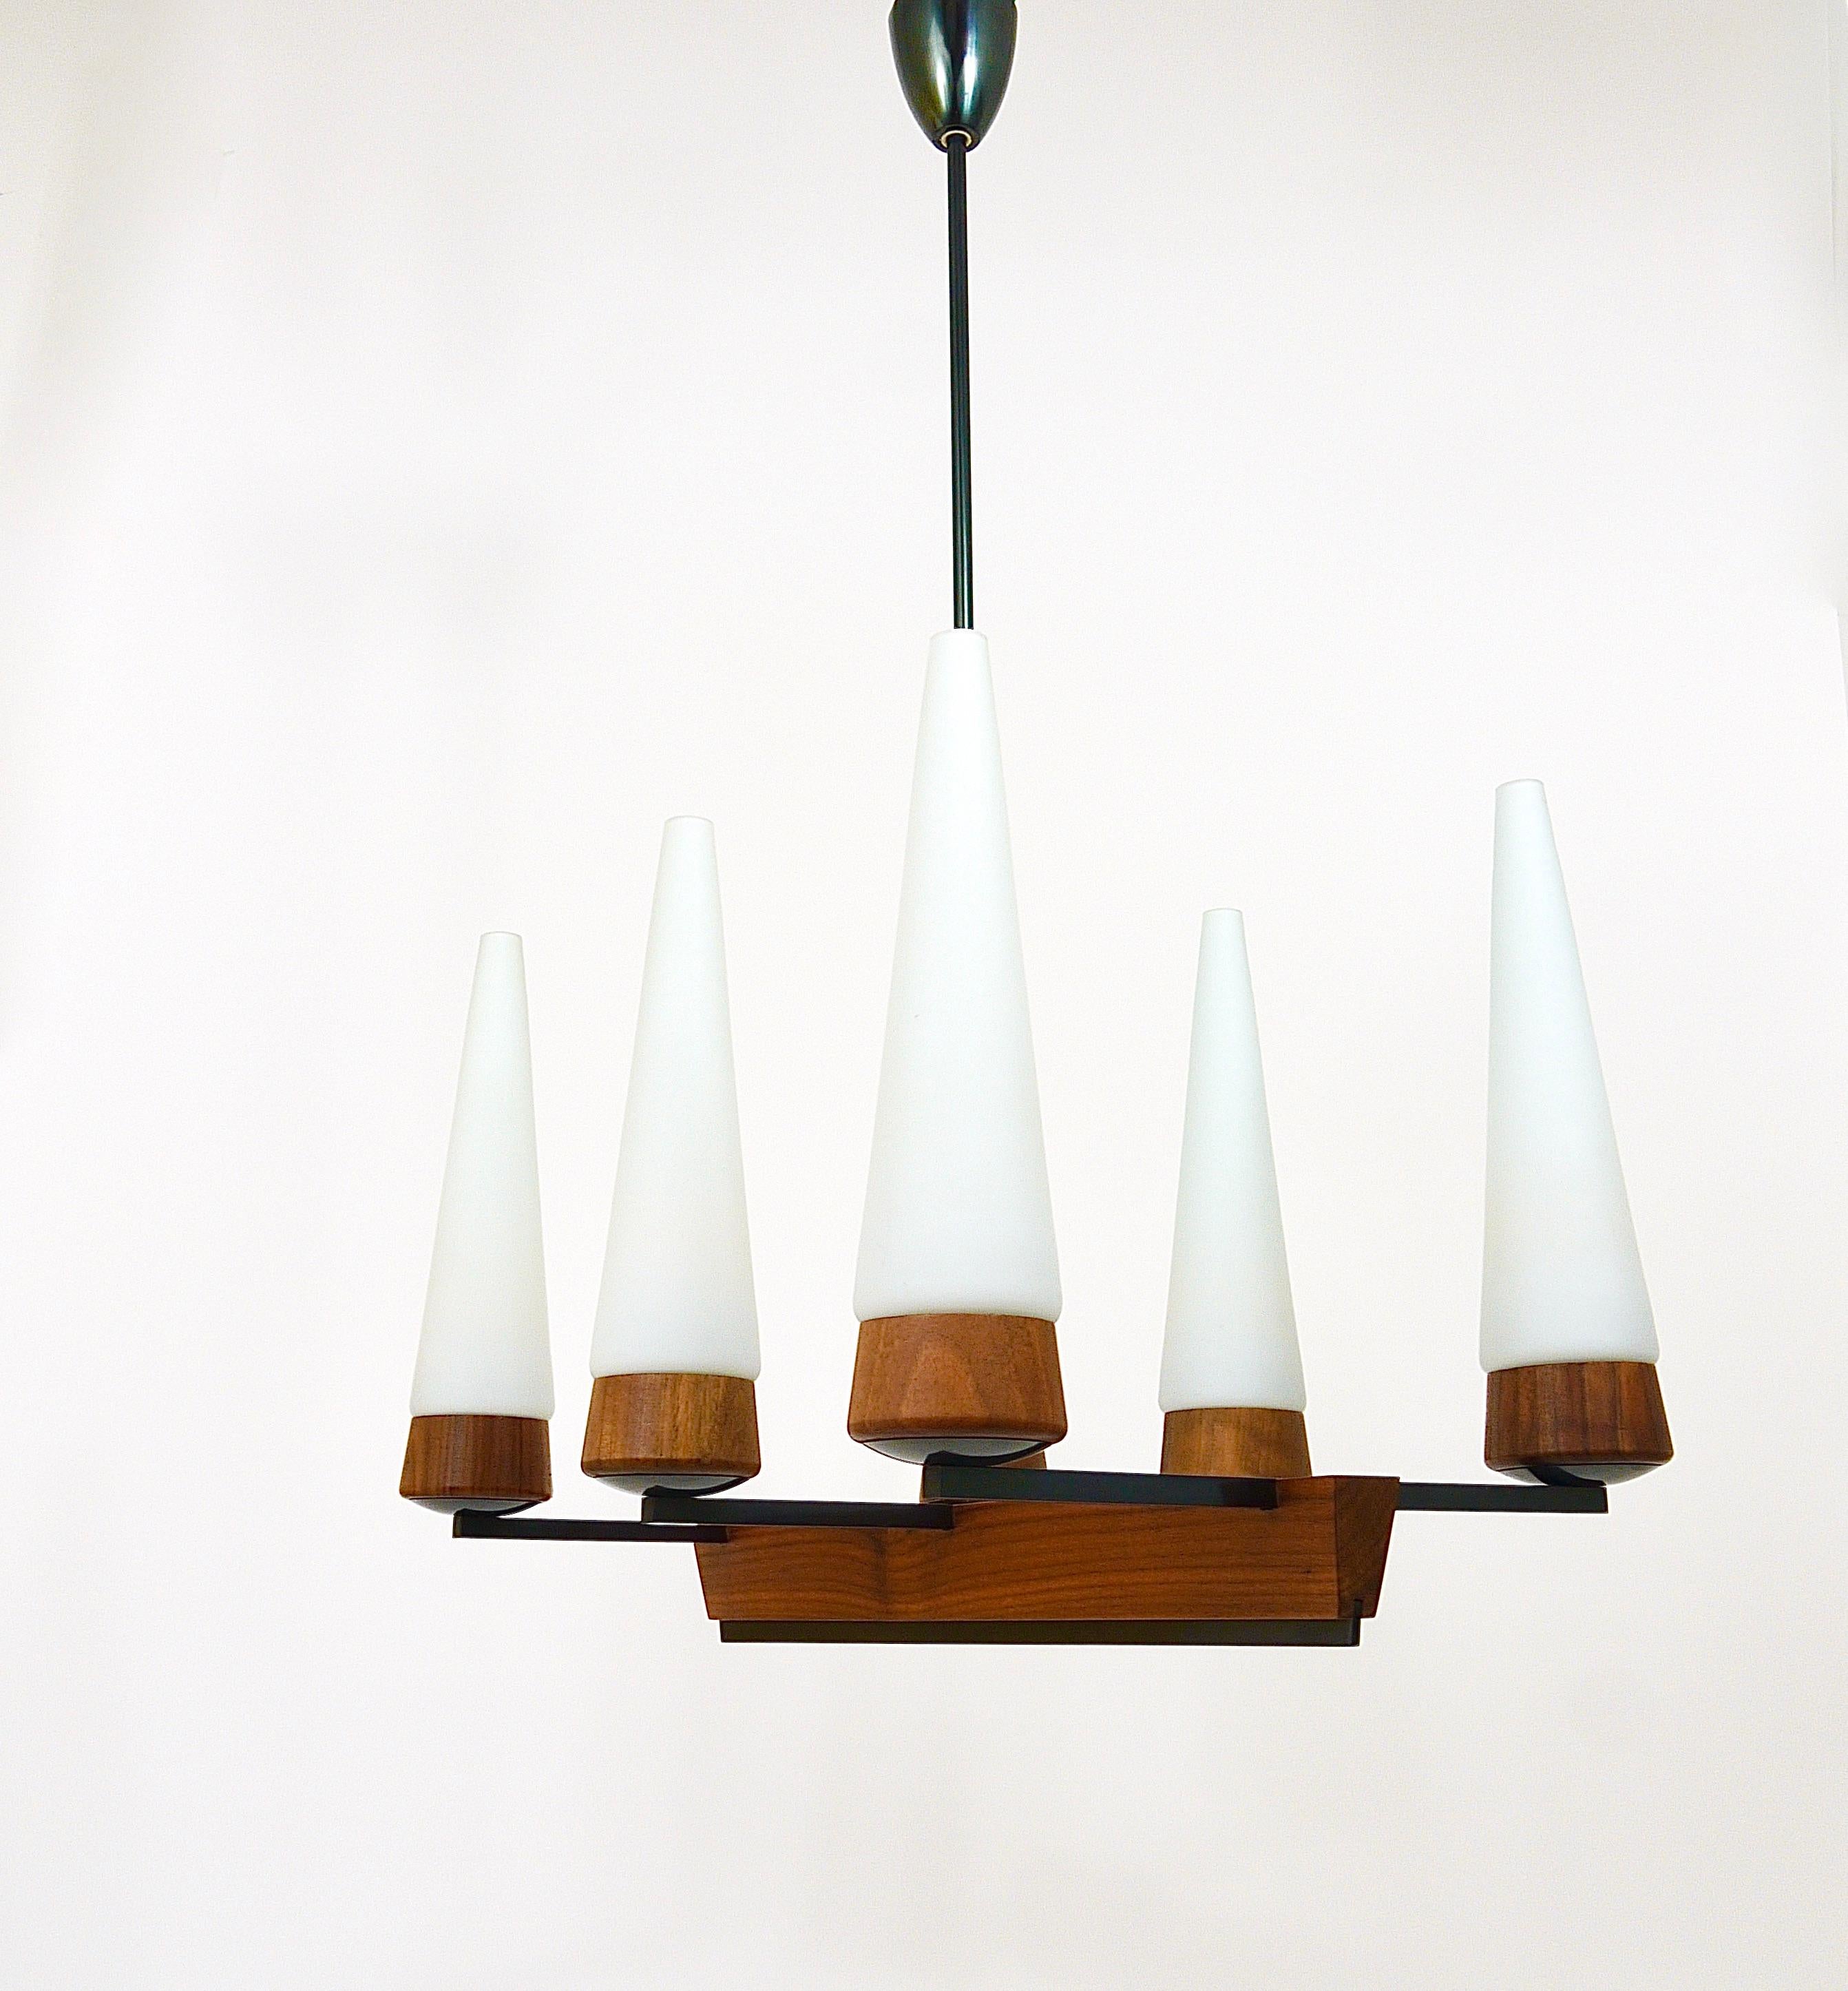 A beautiful and elegant Scandinavian style Midcentury chandelier from the 1950s. Executed by Rupert Nikoll, Vienna, Austria. The chandelier is made of dark-brown wood and black-finished brass. It has 6 arms with conical white satined opal glass